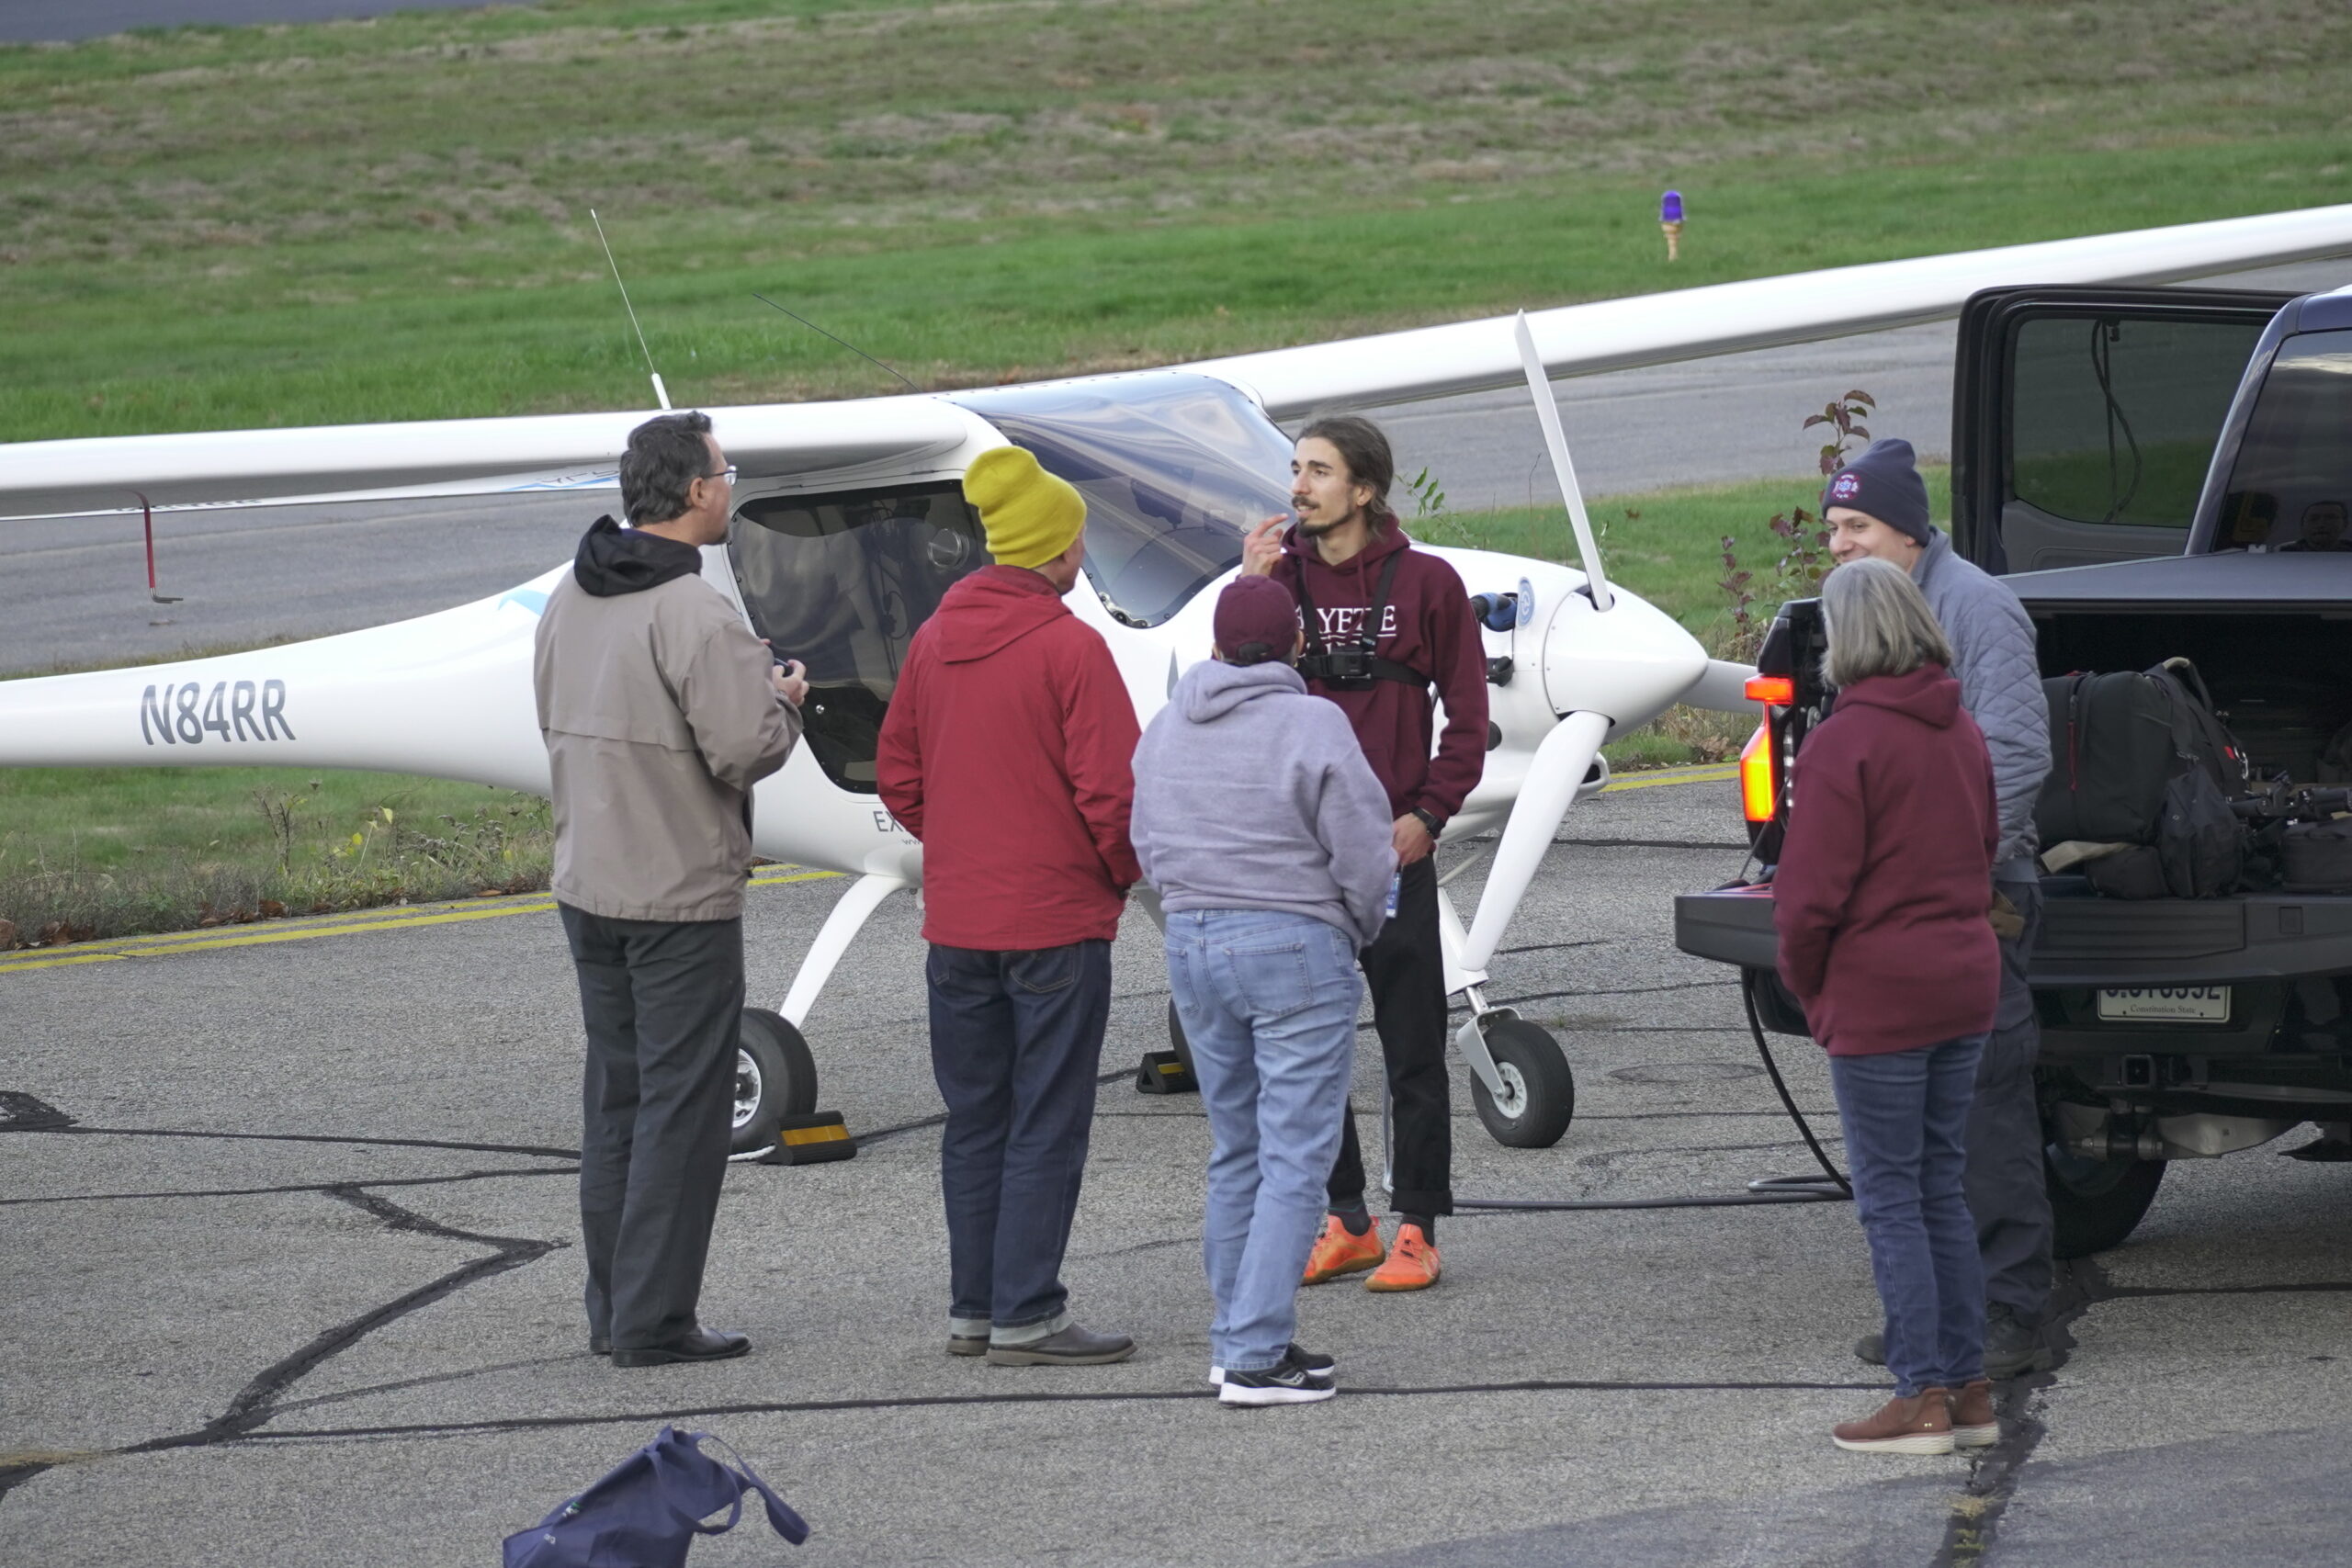 A group from Lafayette stands near an electric plane on the runway.